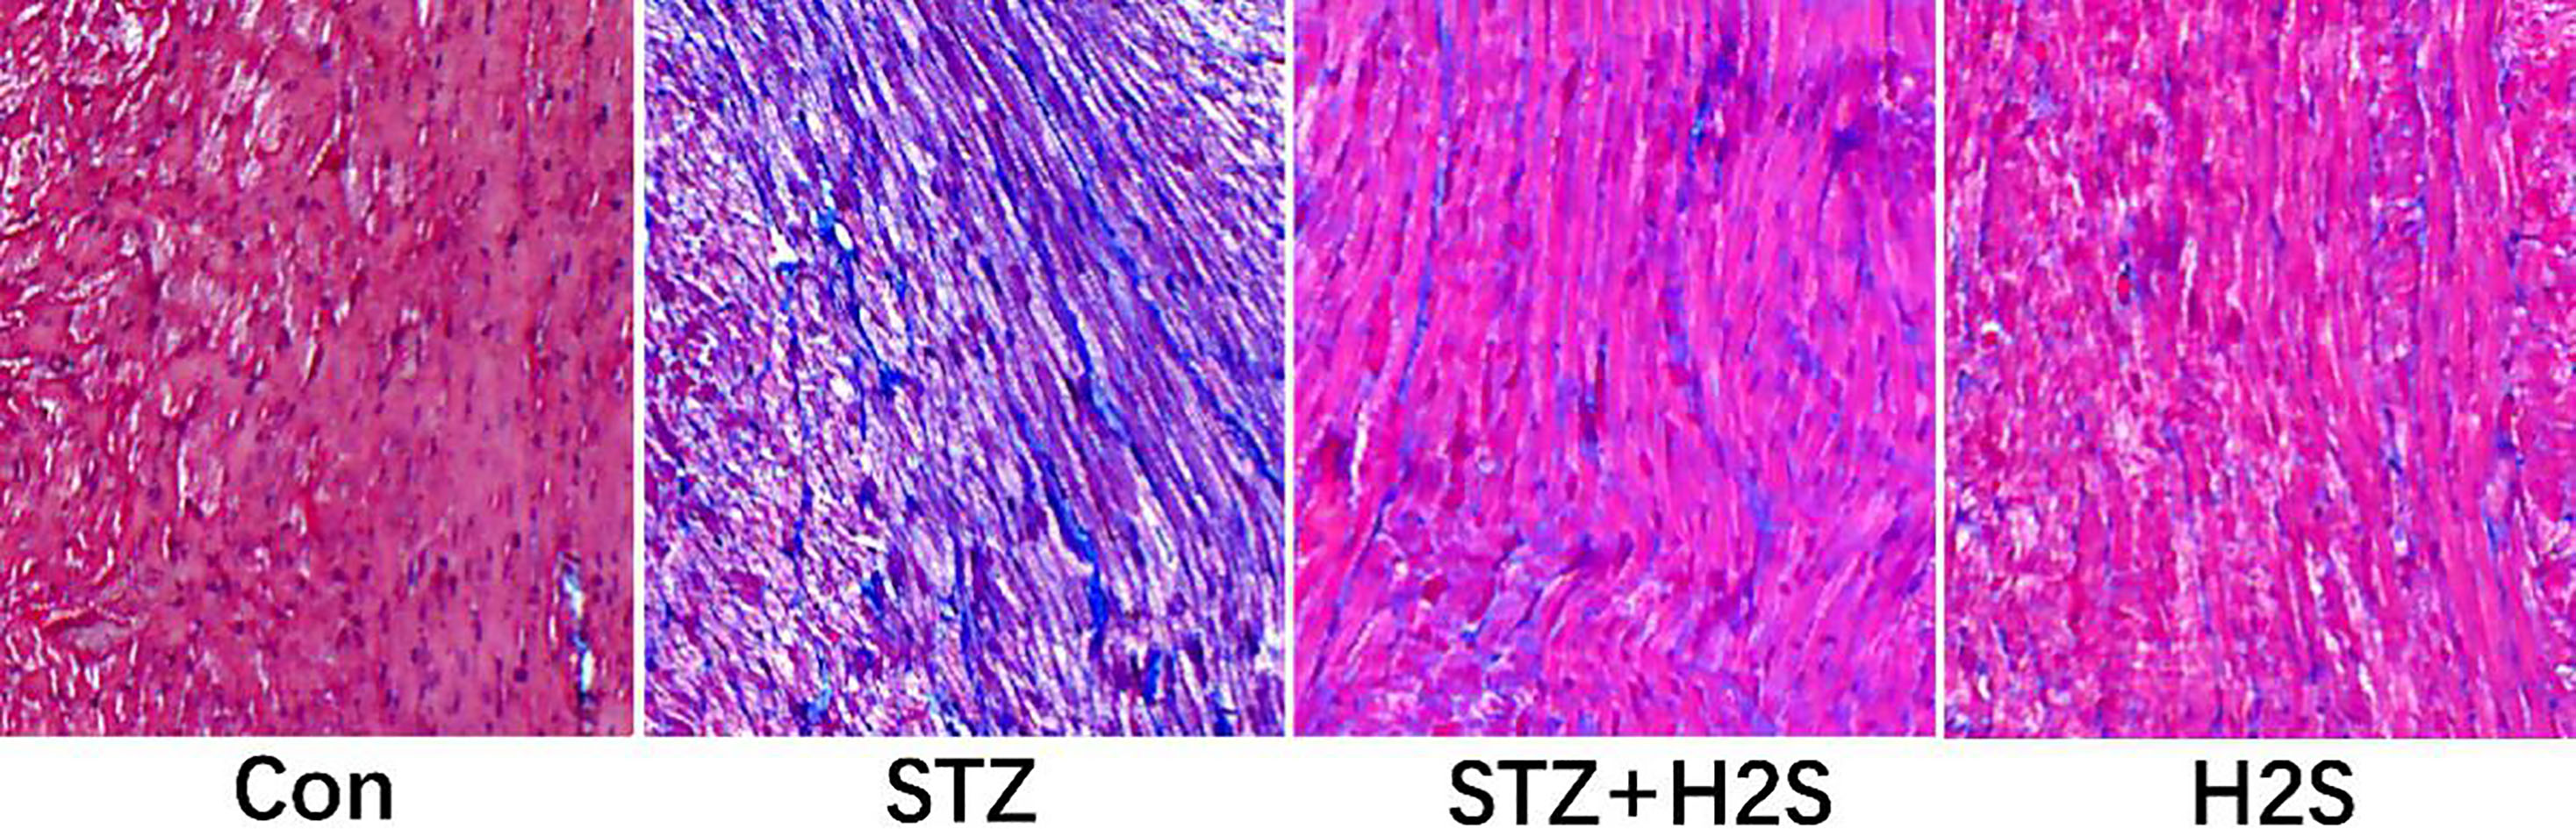 Pathological changes of myocardium assessed by Masson staining (Images were obtained at × 100 magnification).